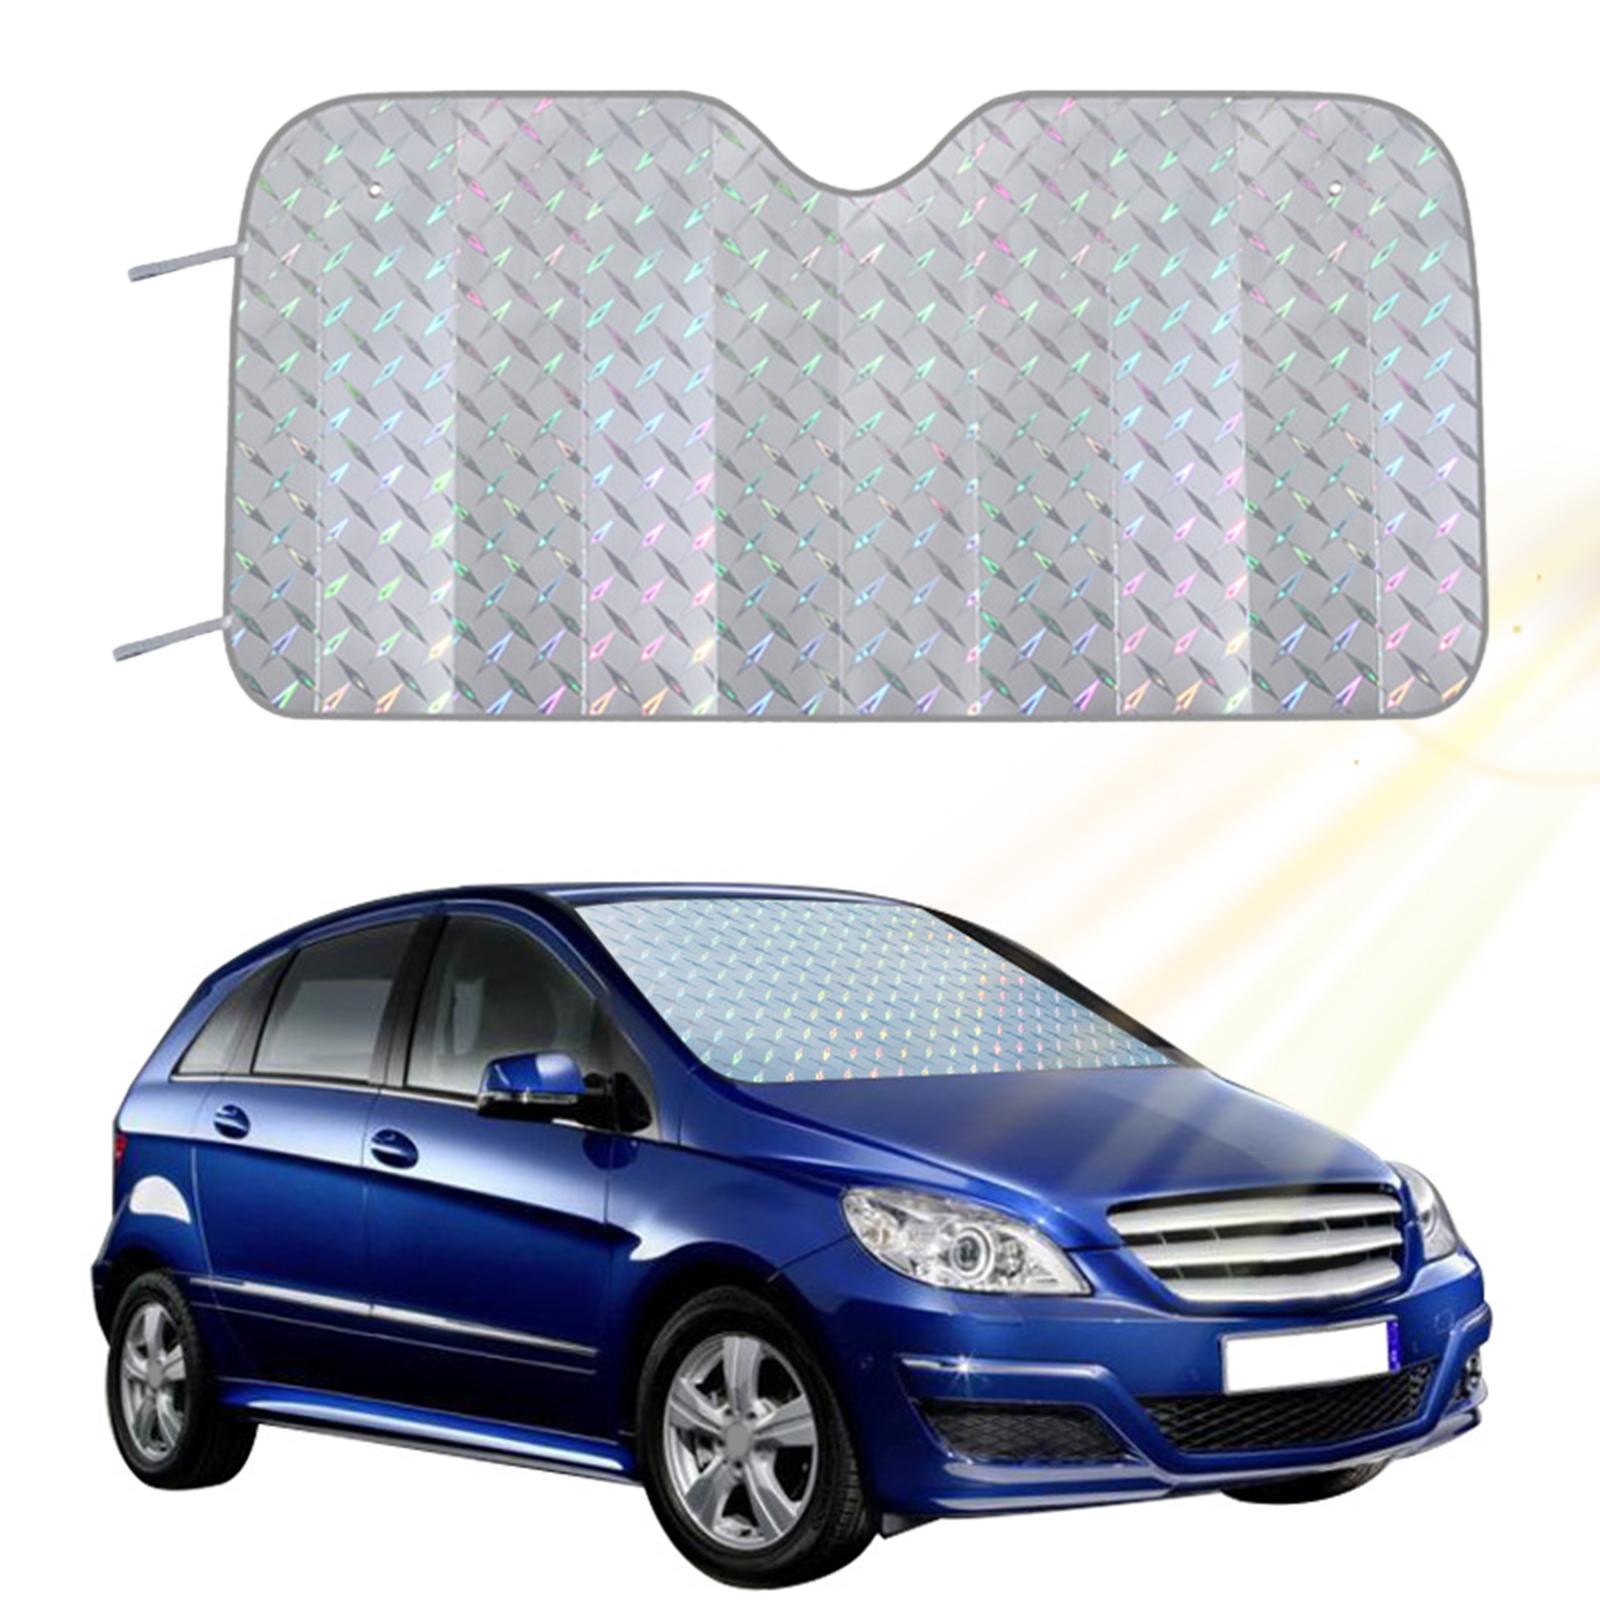 Car Windshield Sunshade Sun Protection Car Parts Save Space Windshield Cover 140cmx75cm